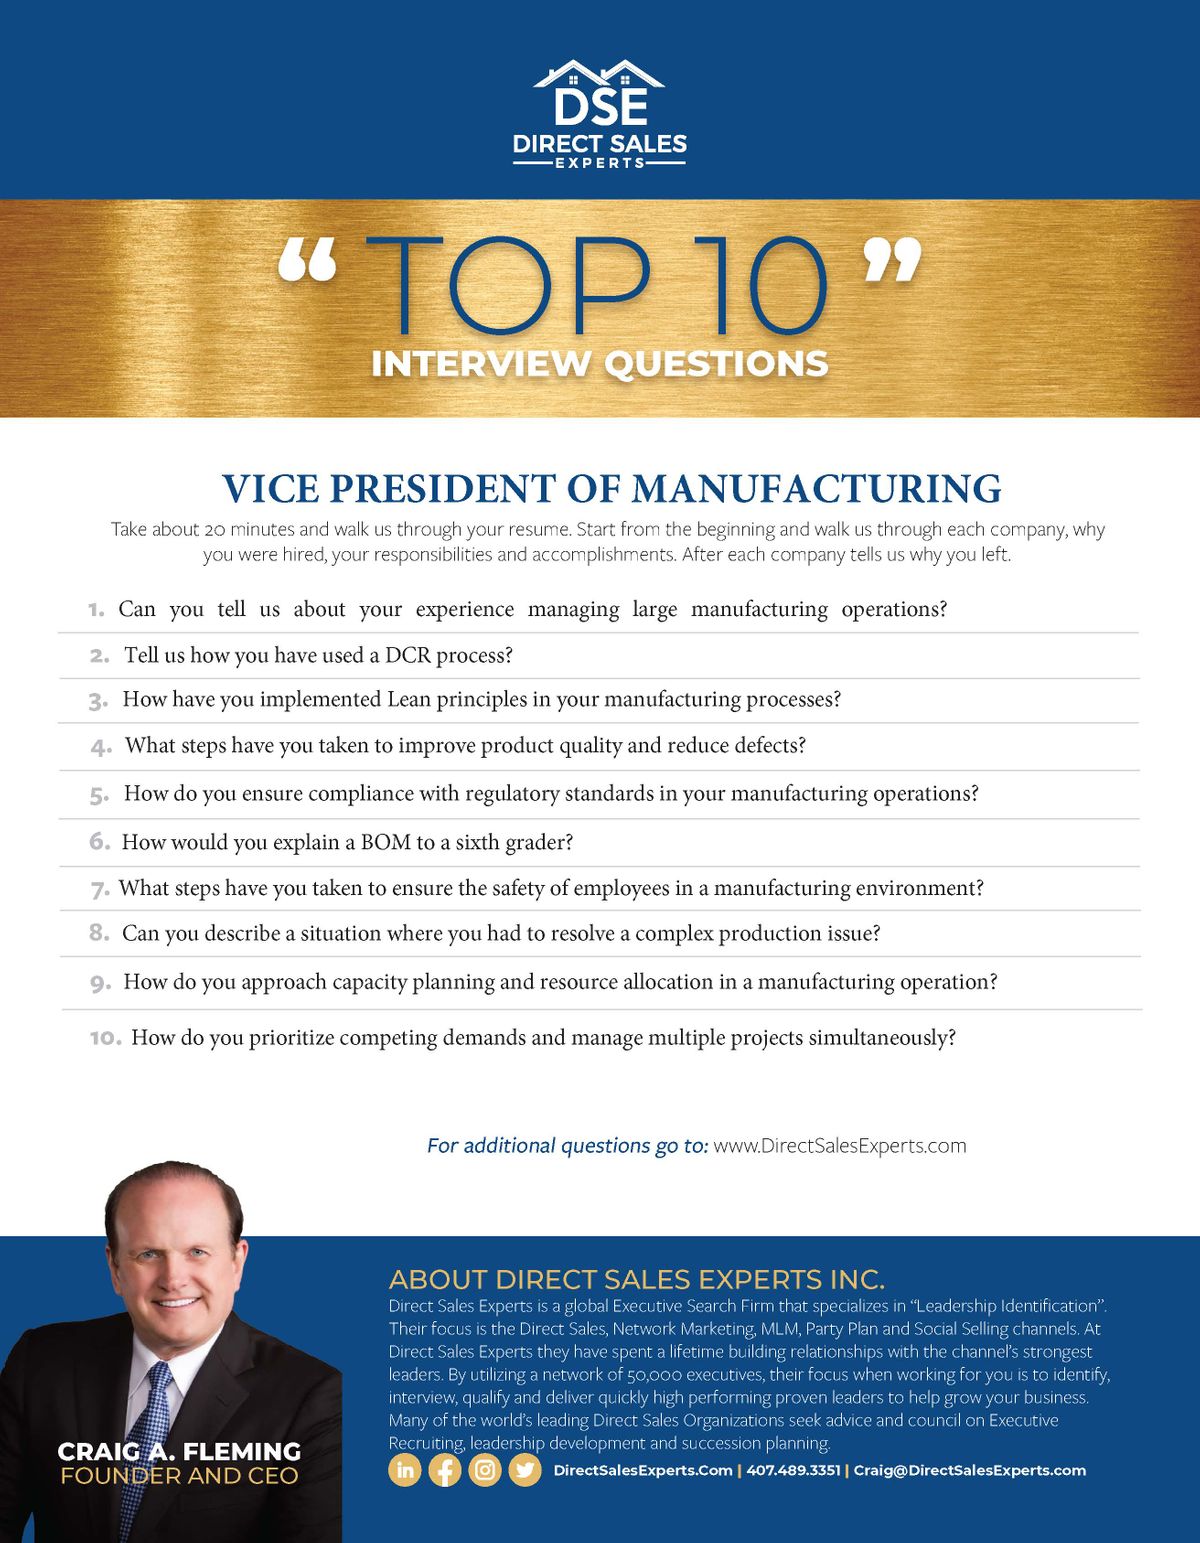 DirectSalesExperts_Top10-VPofManufacturing-JPEG_Page_1.jpg